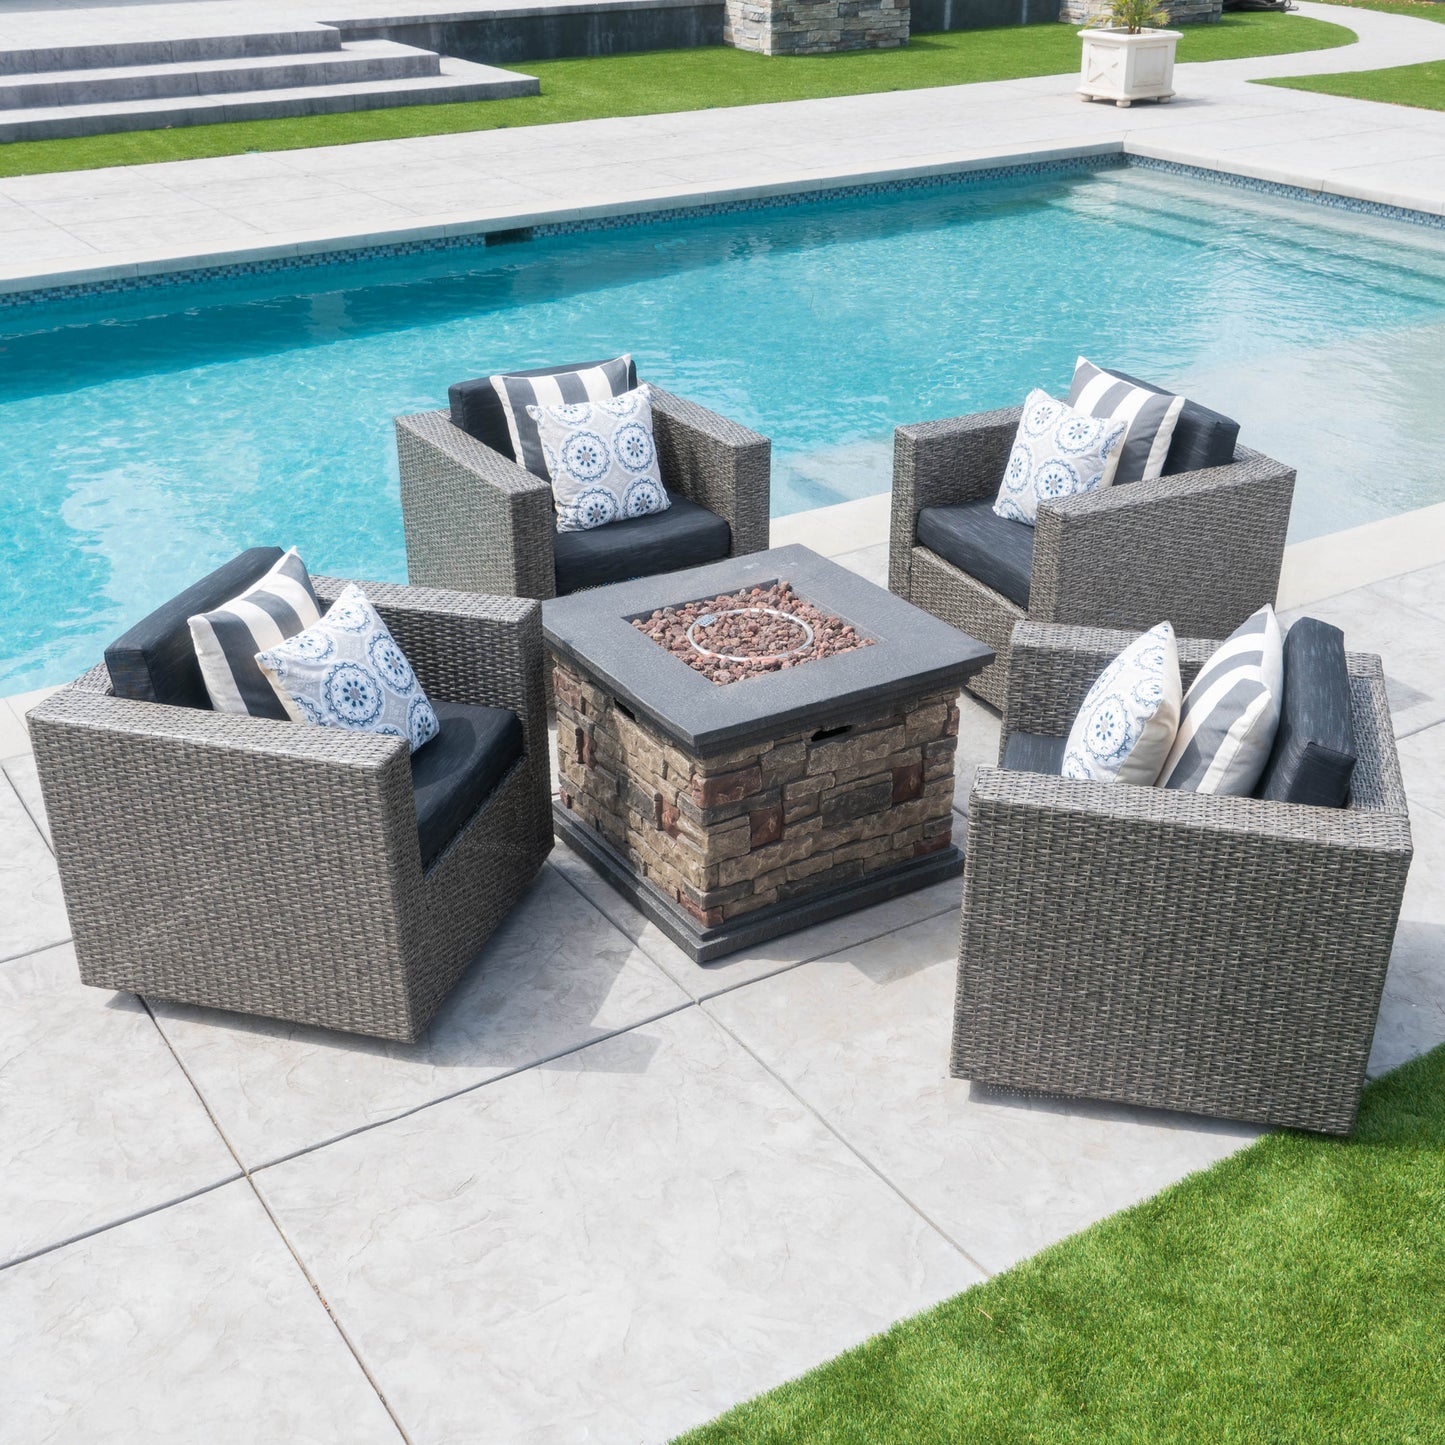 Venice 4-Seater Outdoor Fire Pit Chat Set